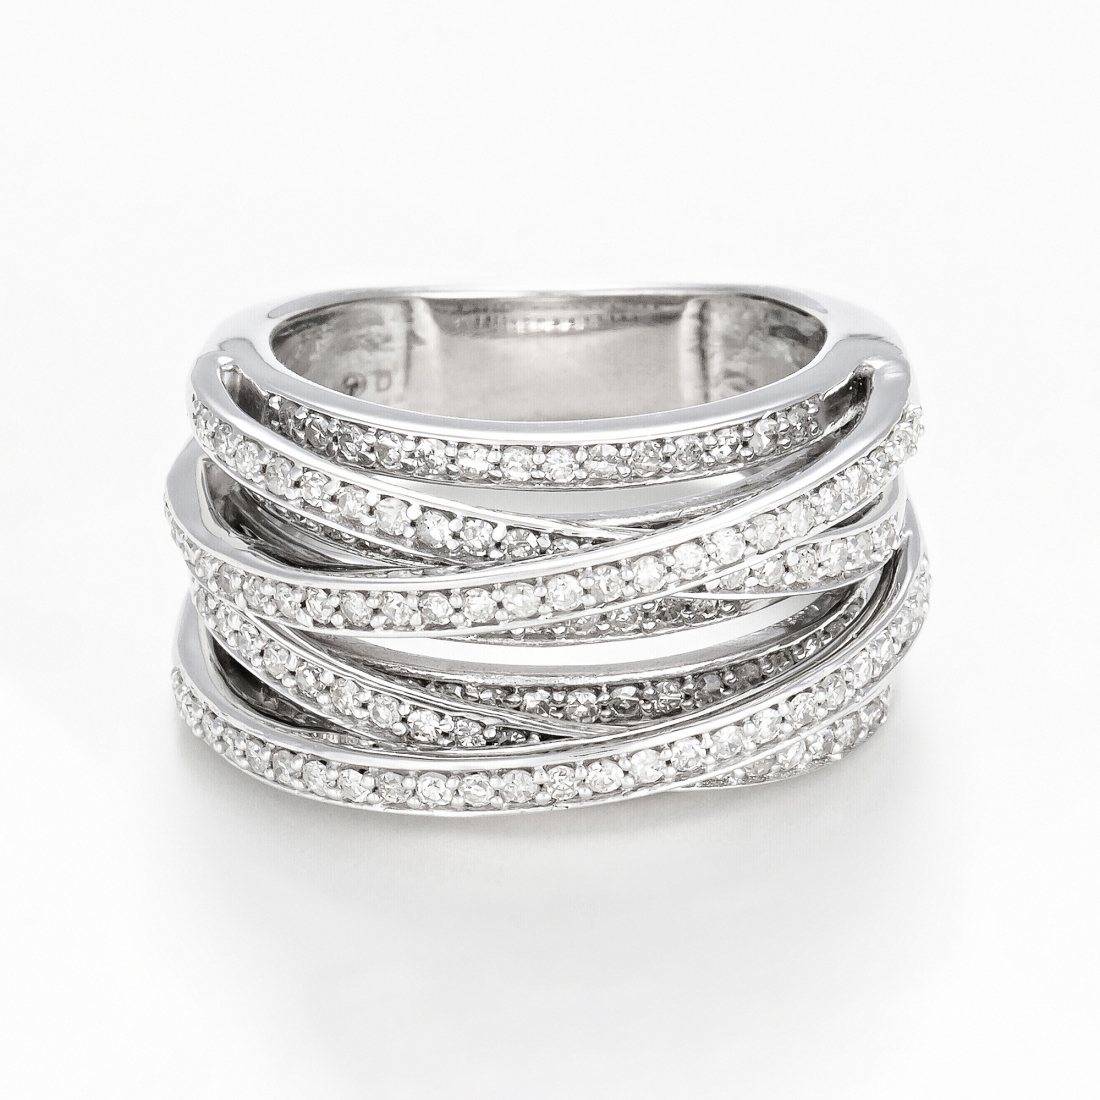 Women's 'New Entrelacs Candides' Ring